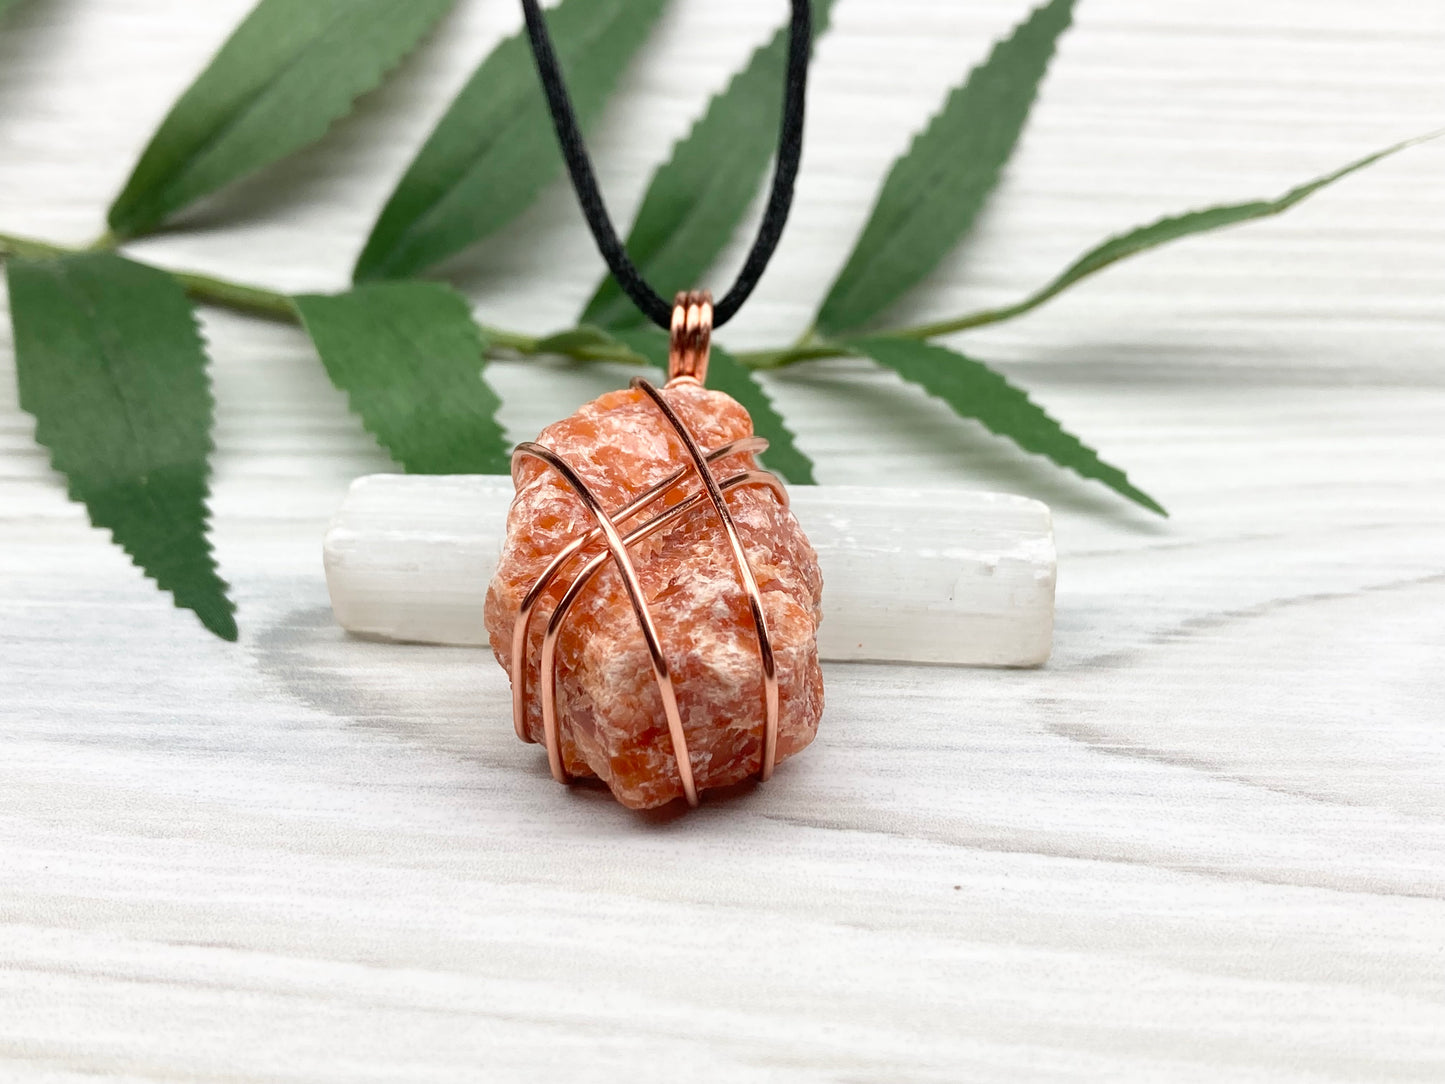 Raw Orange Calcite Necklace. Natural Orange Crystal Hand Wrapped With Copper Wire. Comes On A Black Chain. Leo Zodiac Stone Pendant. New Age Metaphysical Jewelry. Fire Element Gemstone.